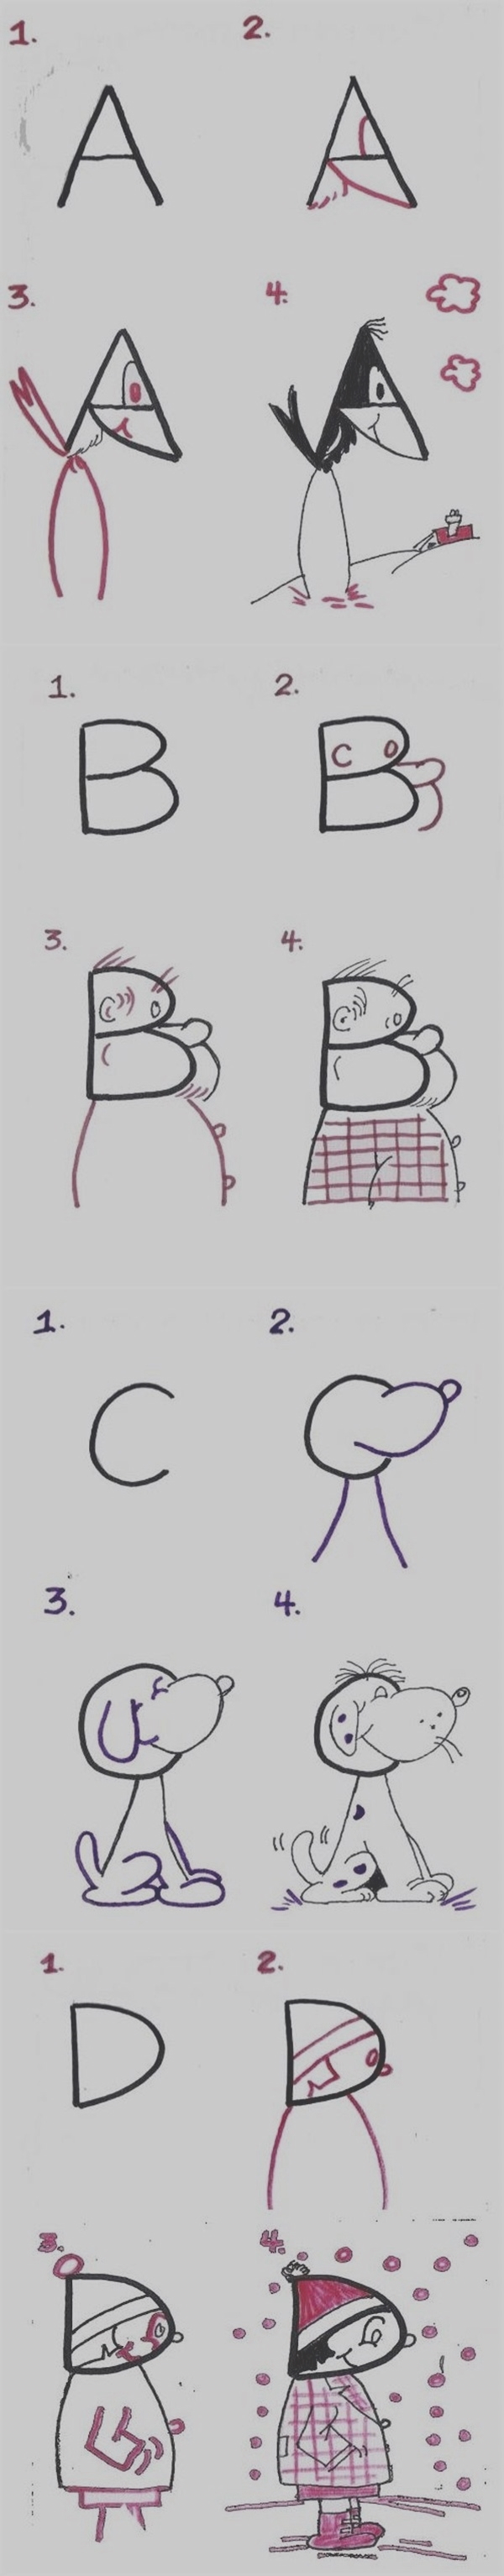 40 Easy Step By Step Art Drawings To Practice Bored Art